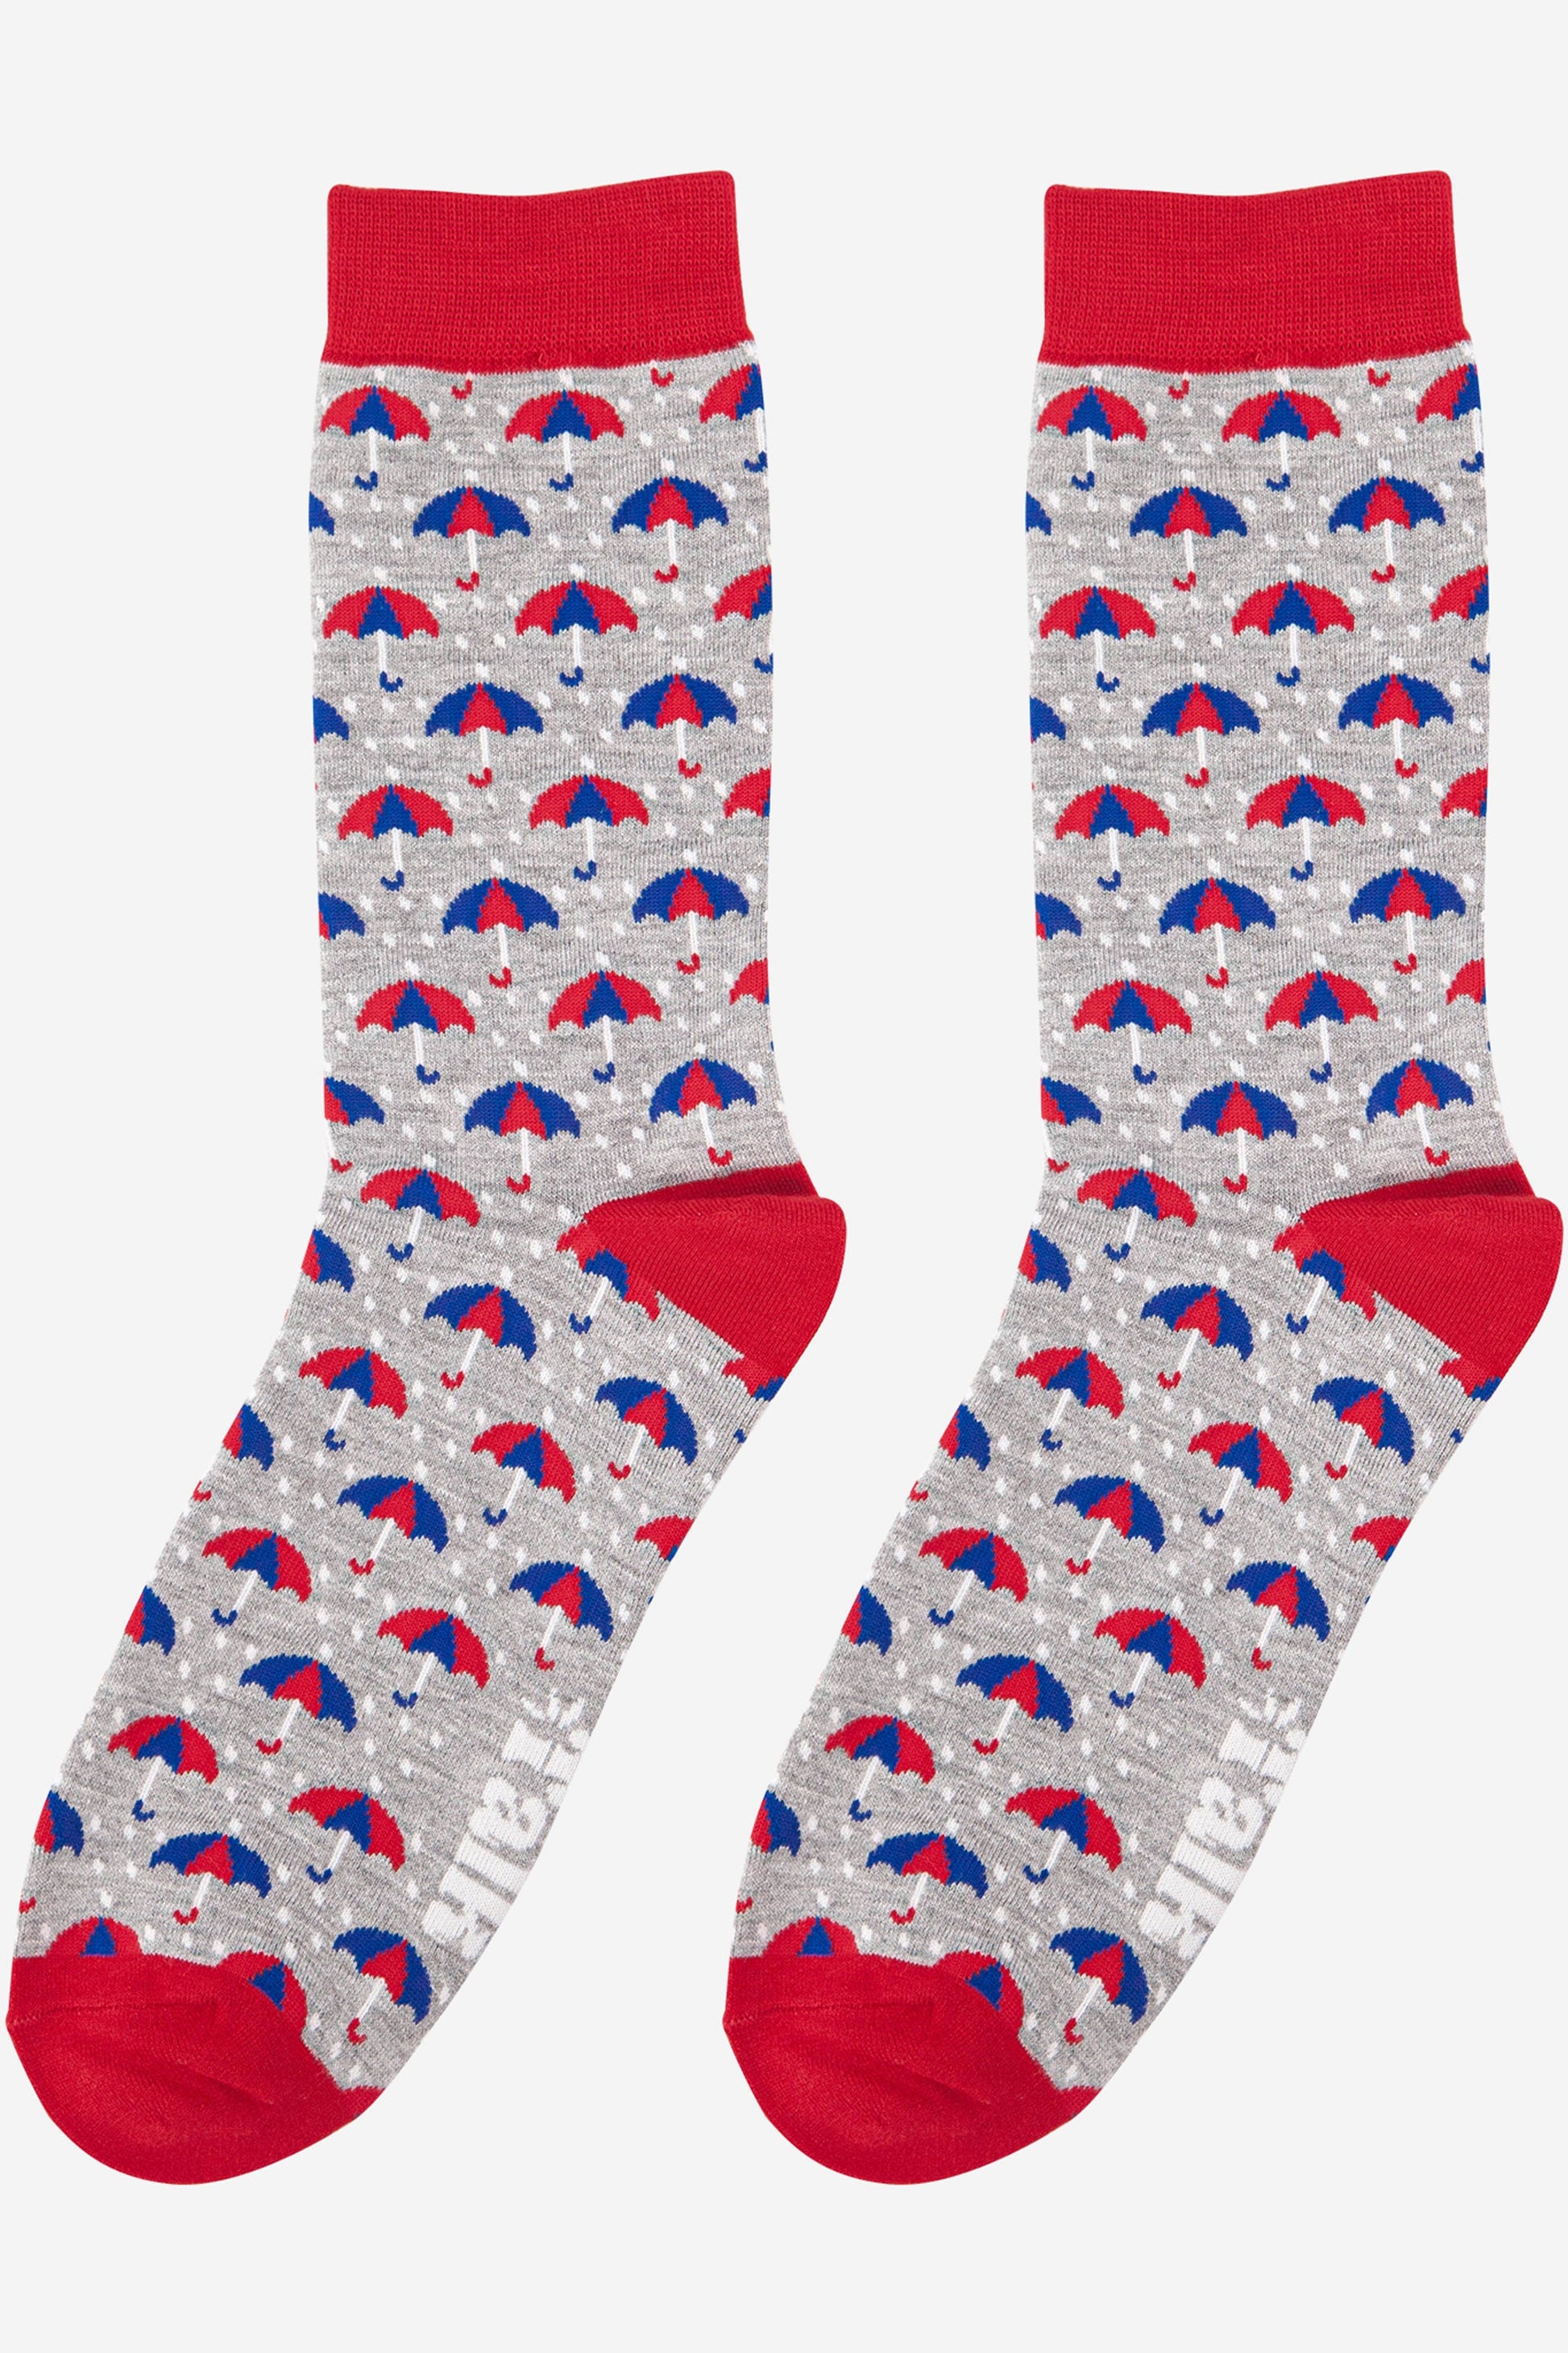 grey and red socks with an all over umbrella print pattern